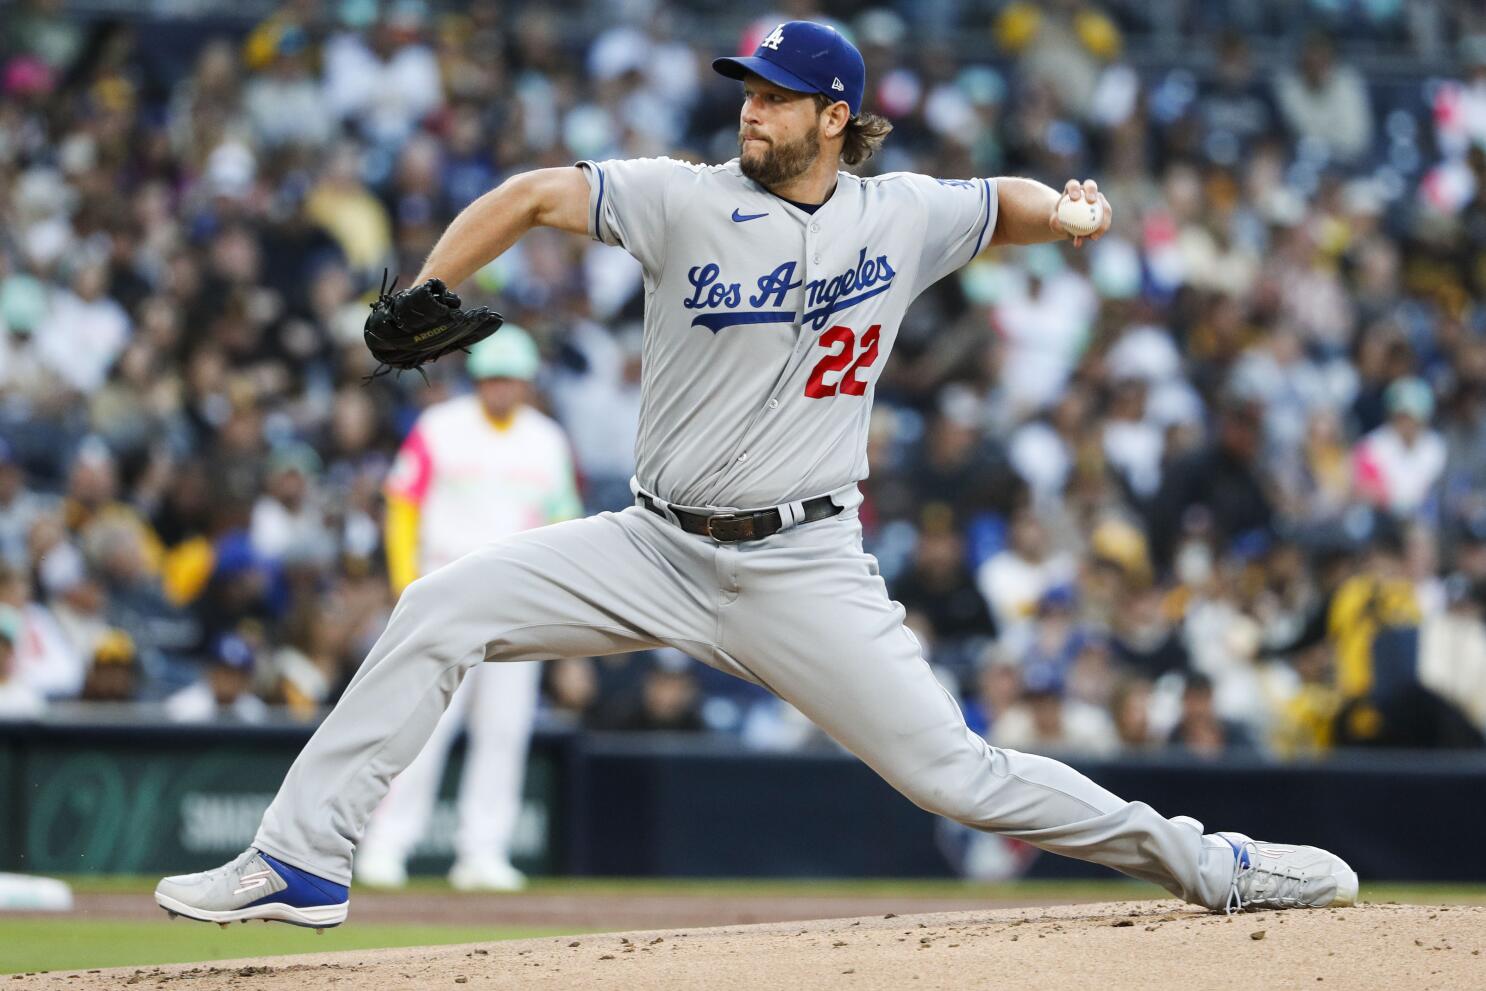 Gagne confident he can make Dodgers if healthy - The San Diego Union-Tribune